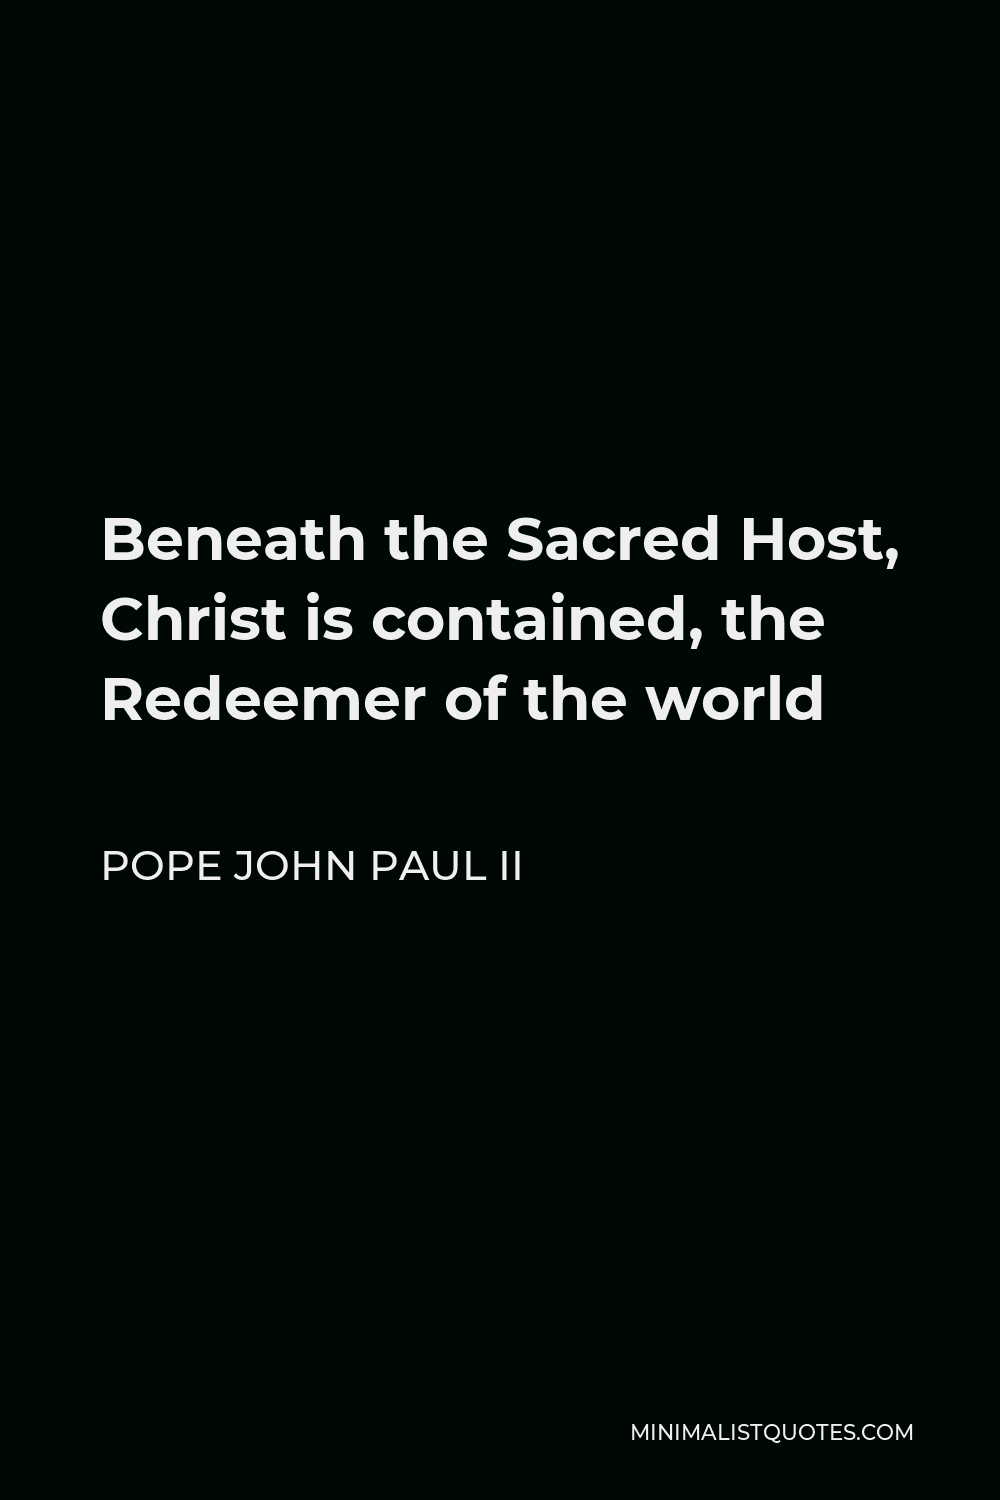 Pope John Paul II Quote - Beneath the Sacred Host, Christ is contained, the Redeemer of the world